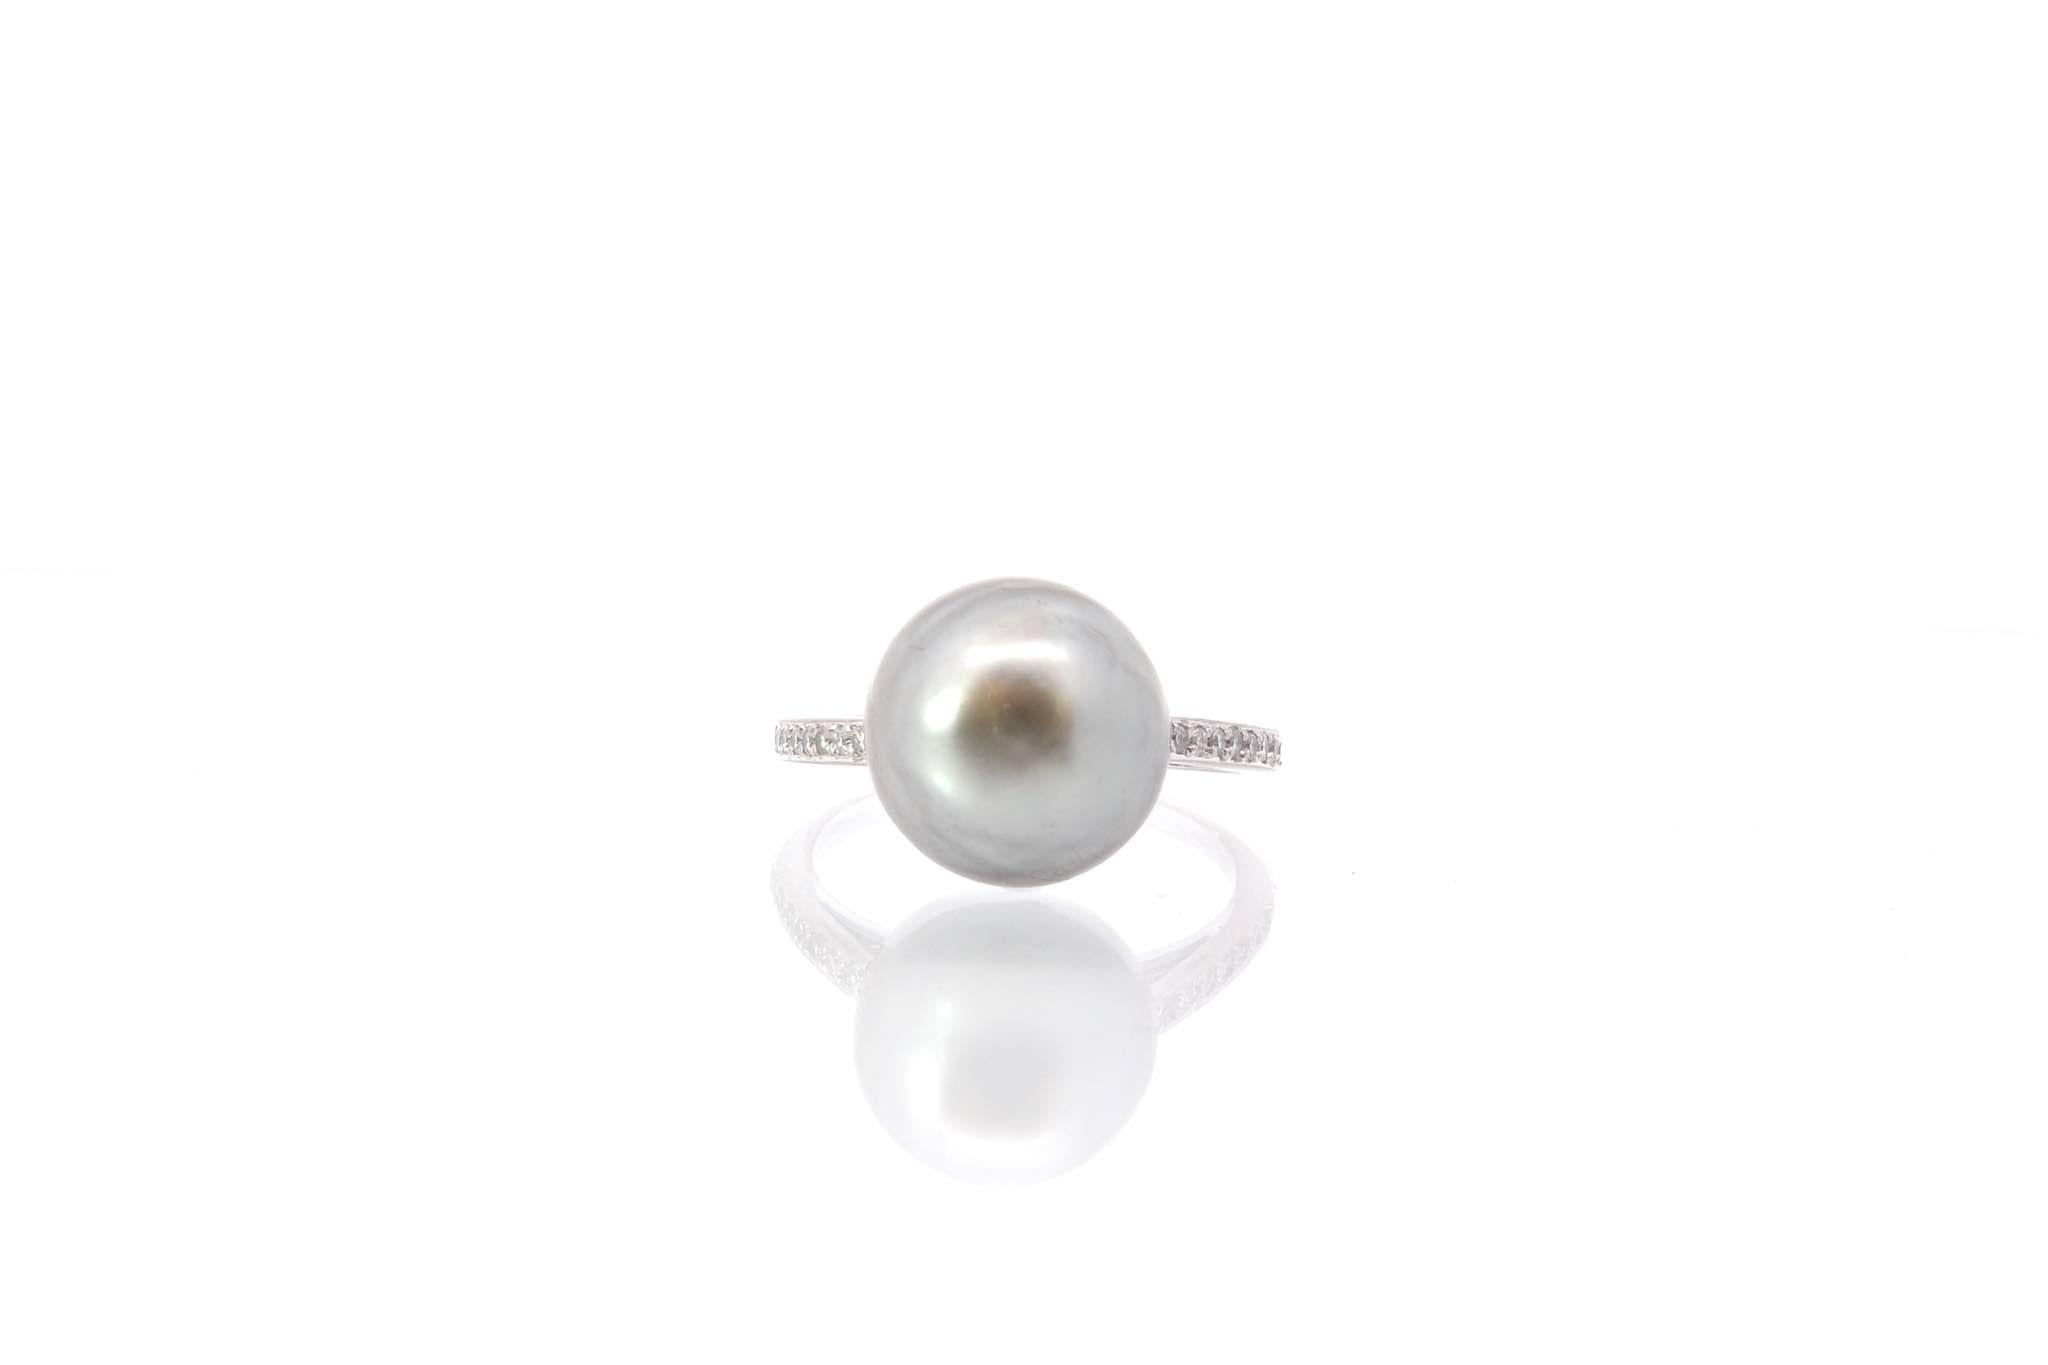 Stones: Tahitian pearl: 1.2 cm and 20 diamonds: 0.15 ct
Material: 18k white gold
Weight: 5.3g
Period: 1980
Size: 54 (free sizing)
Certificate
Ref. : 25550